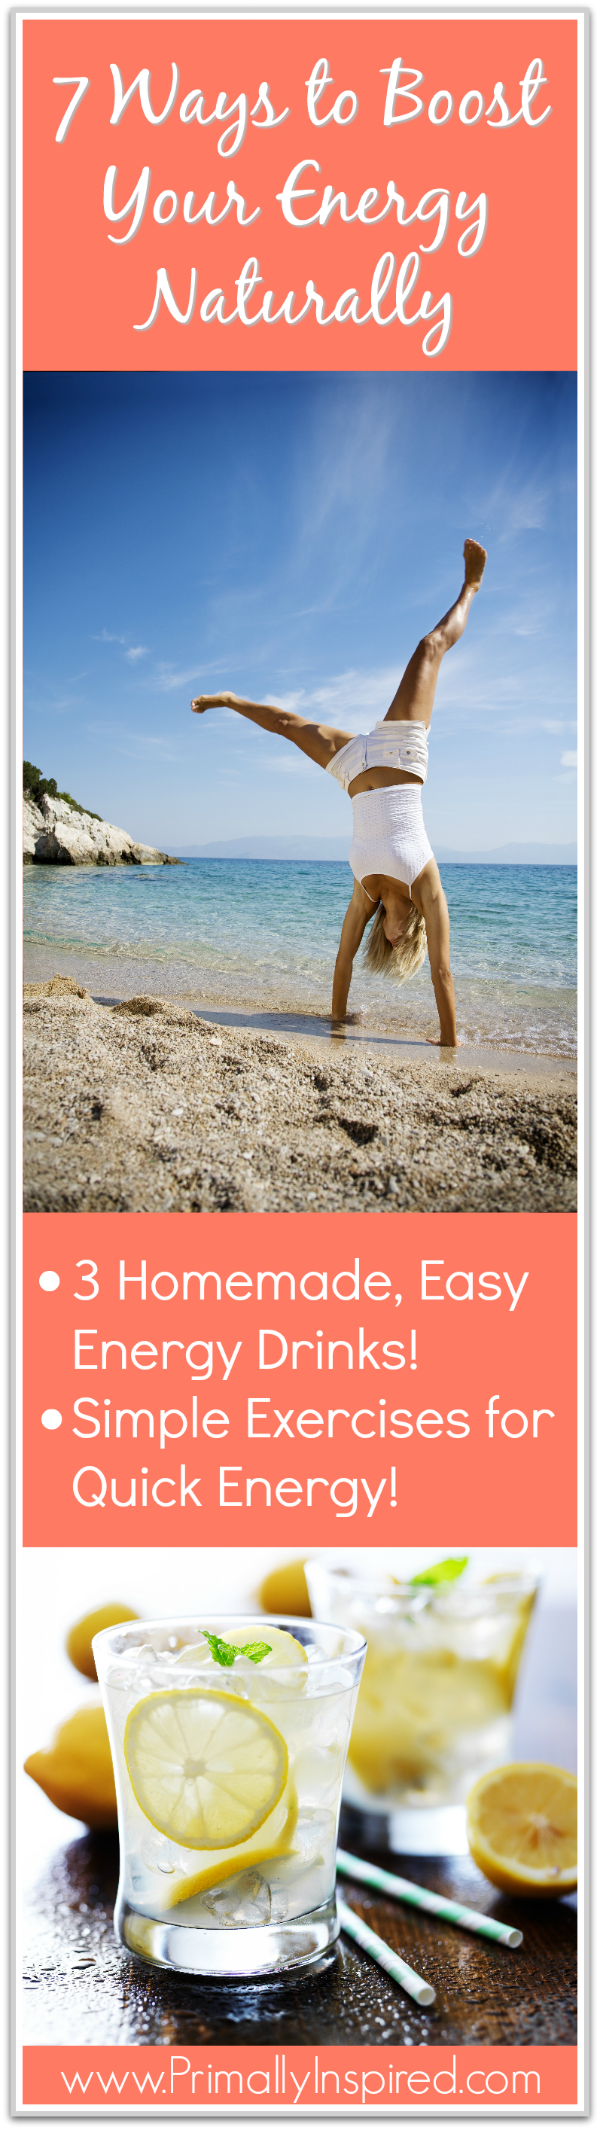 Get more energy naturally! Here's 7 natural energy boosts to increase your energy quickly when you're tired using easy, natural energy drink recipes, movement and harnessing the power of the mind.